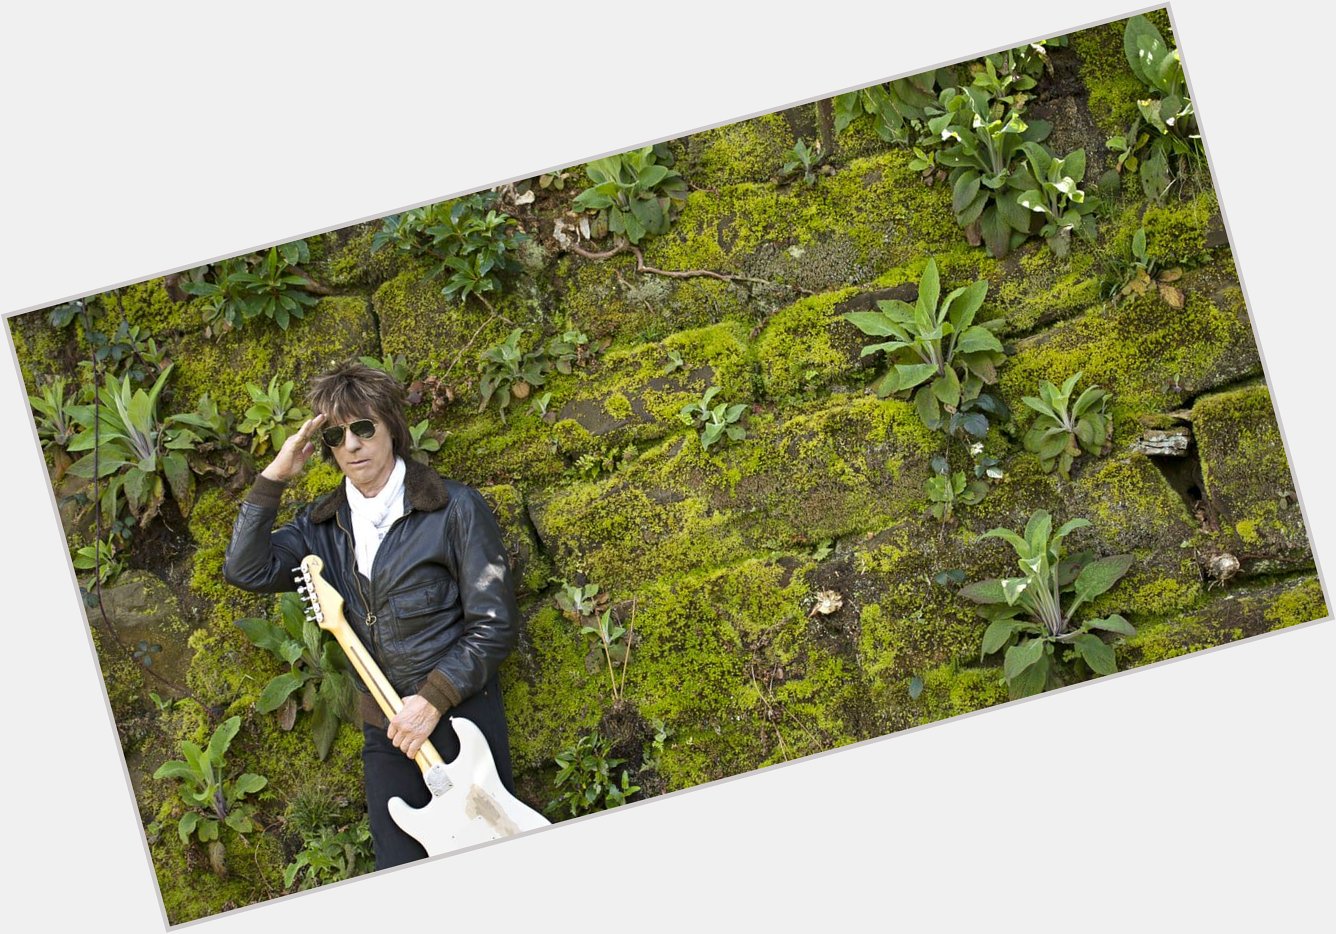 Happy birthday Jeff Beck! Check out our recent interview with the guitar legend  